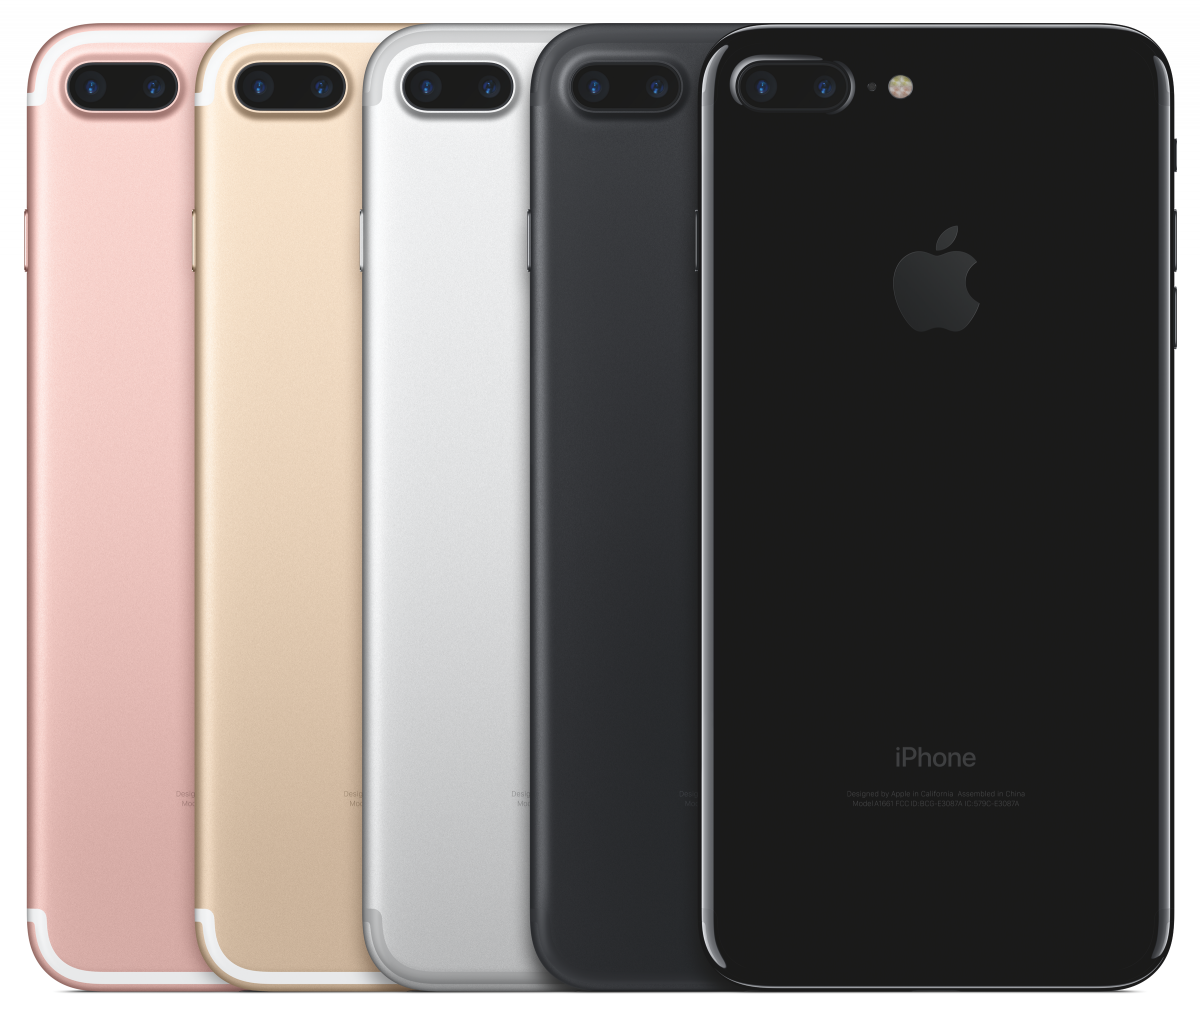 the-iphone-7-comes-in-five-colors-rose-gold-gold-silver-and-two-new-shades-of-black